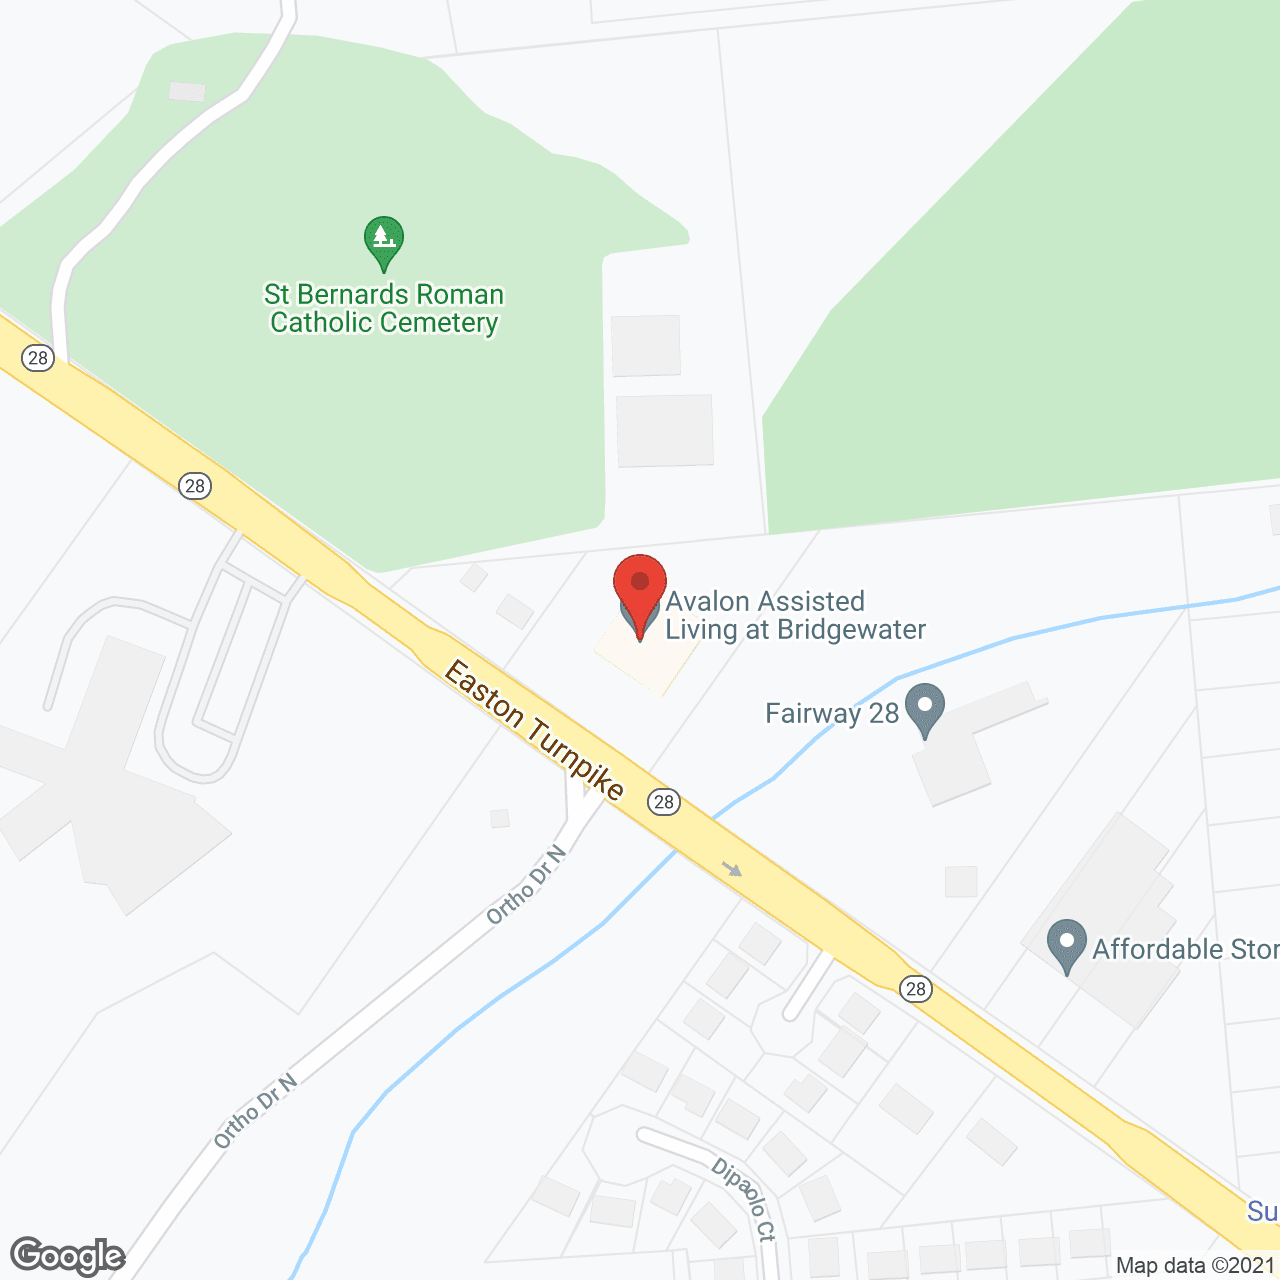 Avalon Assisted Living at Bridgewater in google map